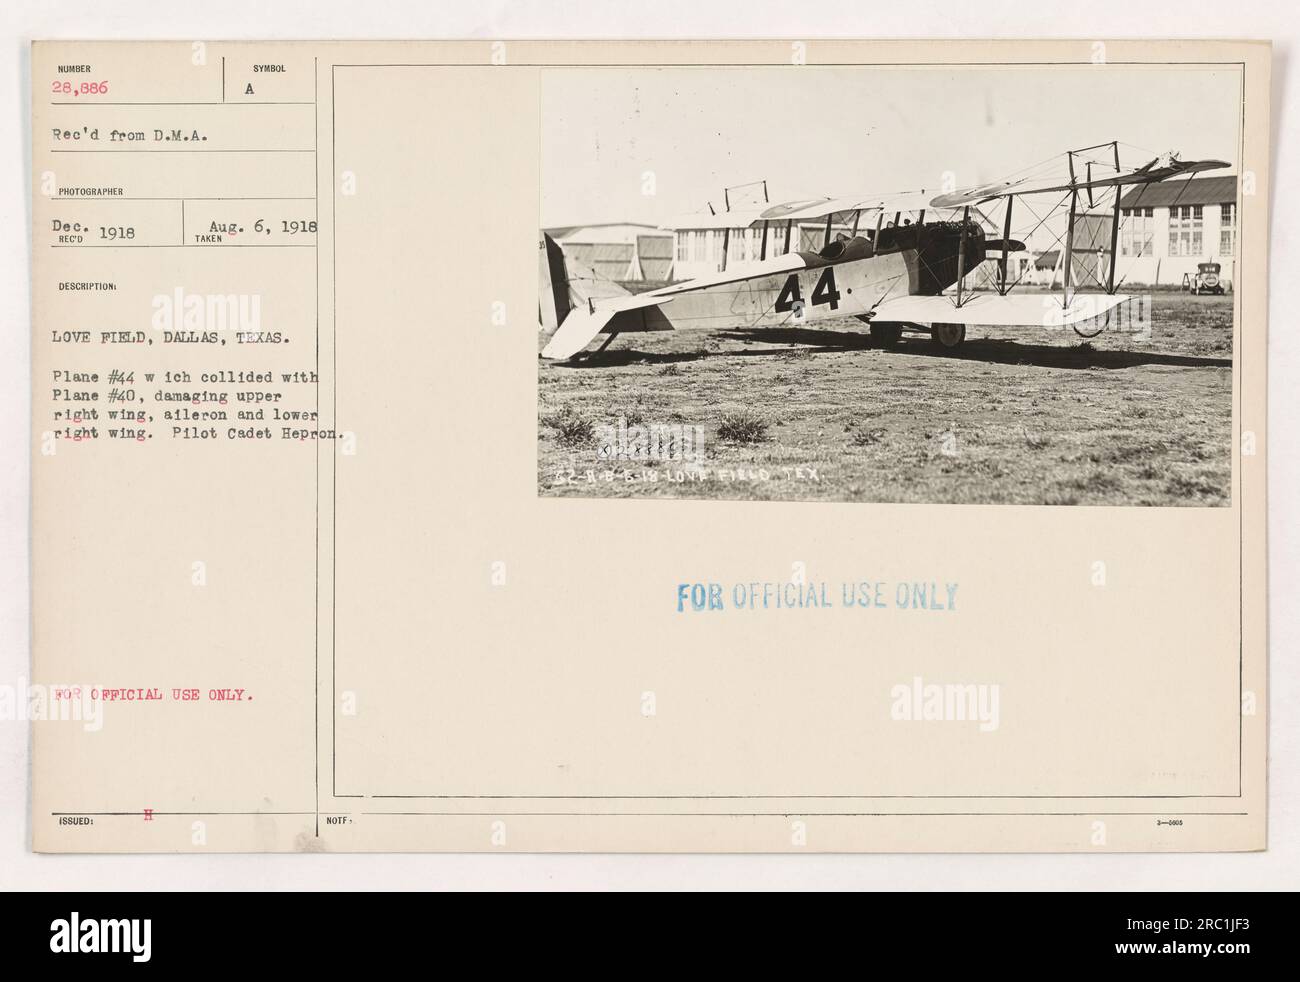 American military plane #44 collides with plane #40 at Love Field in Dallas, Texas on August 6, 1918. The collision results in damage to the upper right wing, aileron, and lower right wing of plane #44. The pilot of plane #44 is Cadet Hepron. This information is marked as 'FOR OFFICIAL USE ONLY.' Stock Photo